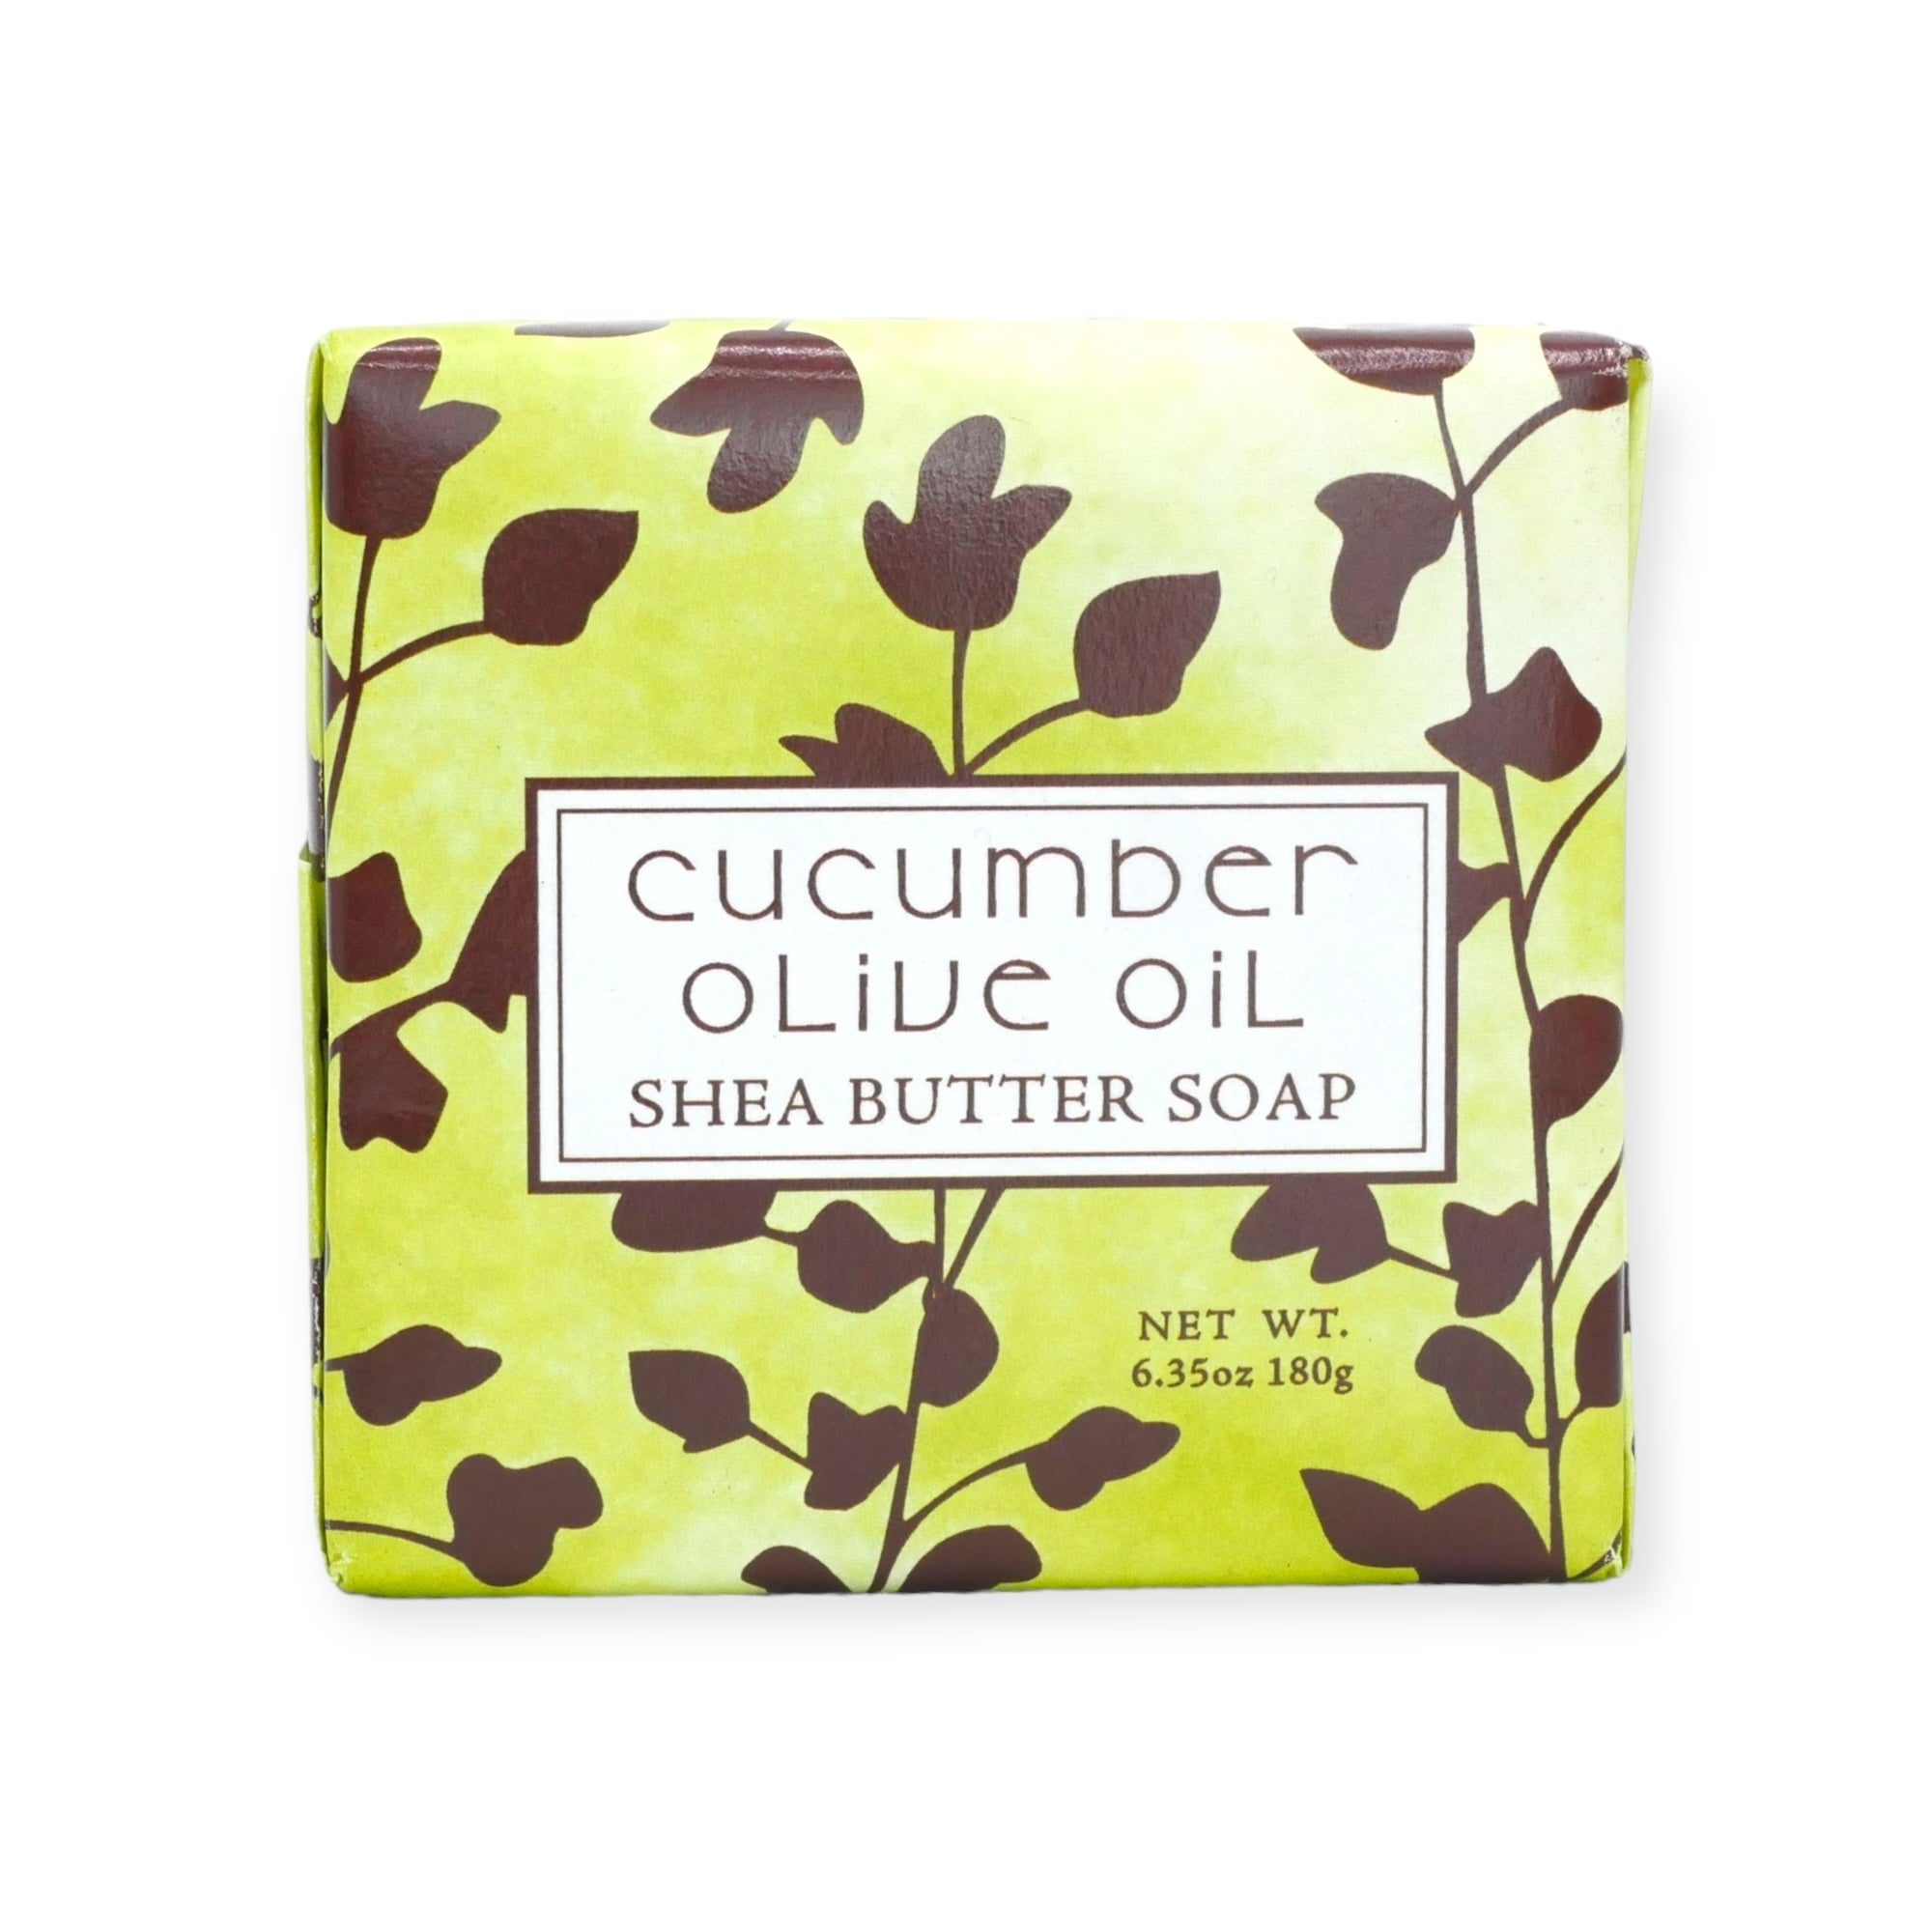 Cucumber Olive Oil Shea Butter Soap by Greenwich Bay Trading Co.